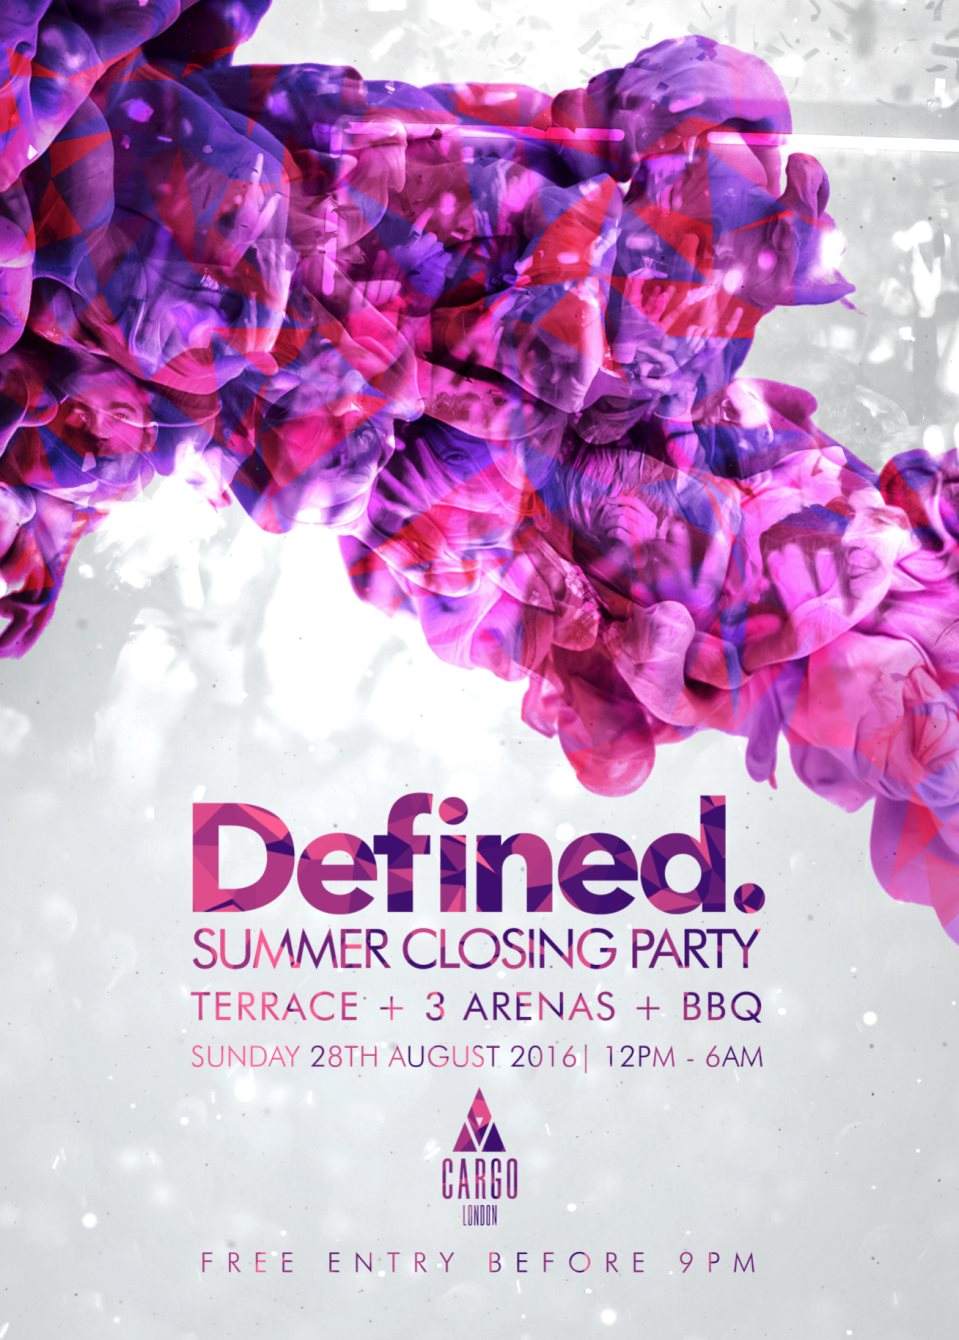 Defined. x Cargo - Summer Closing Party - Terrace & Club Night - フライヤー表